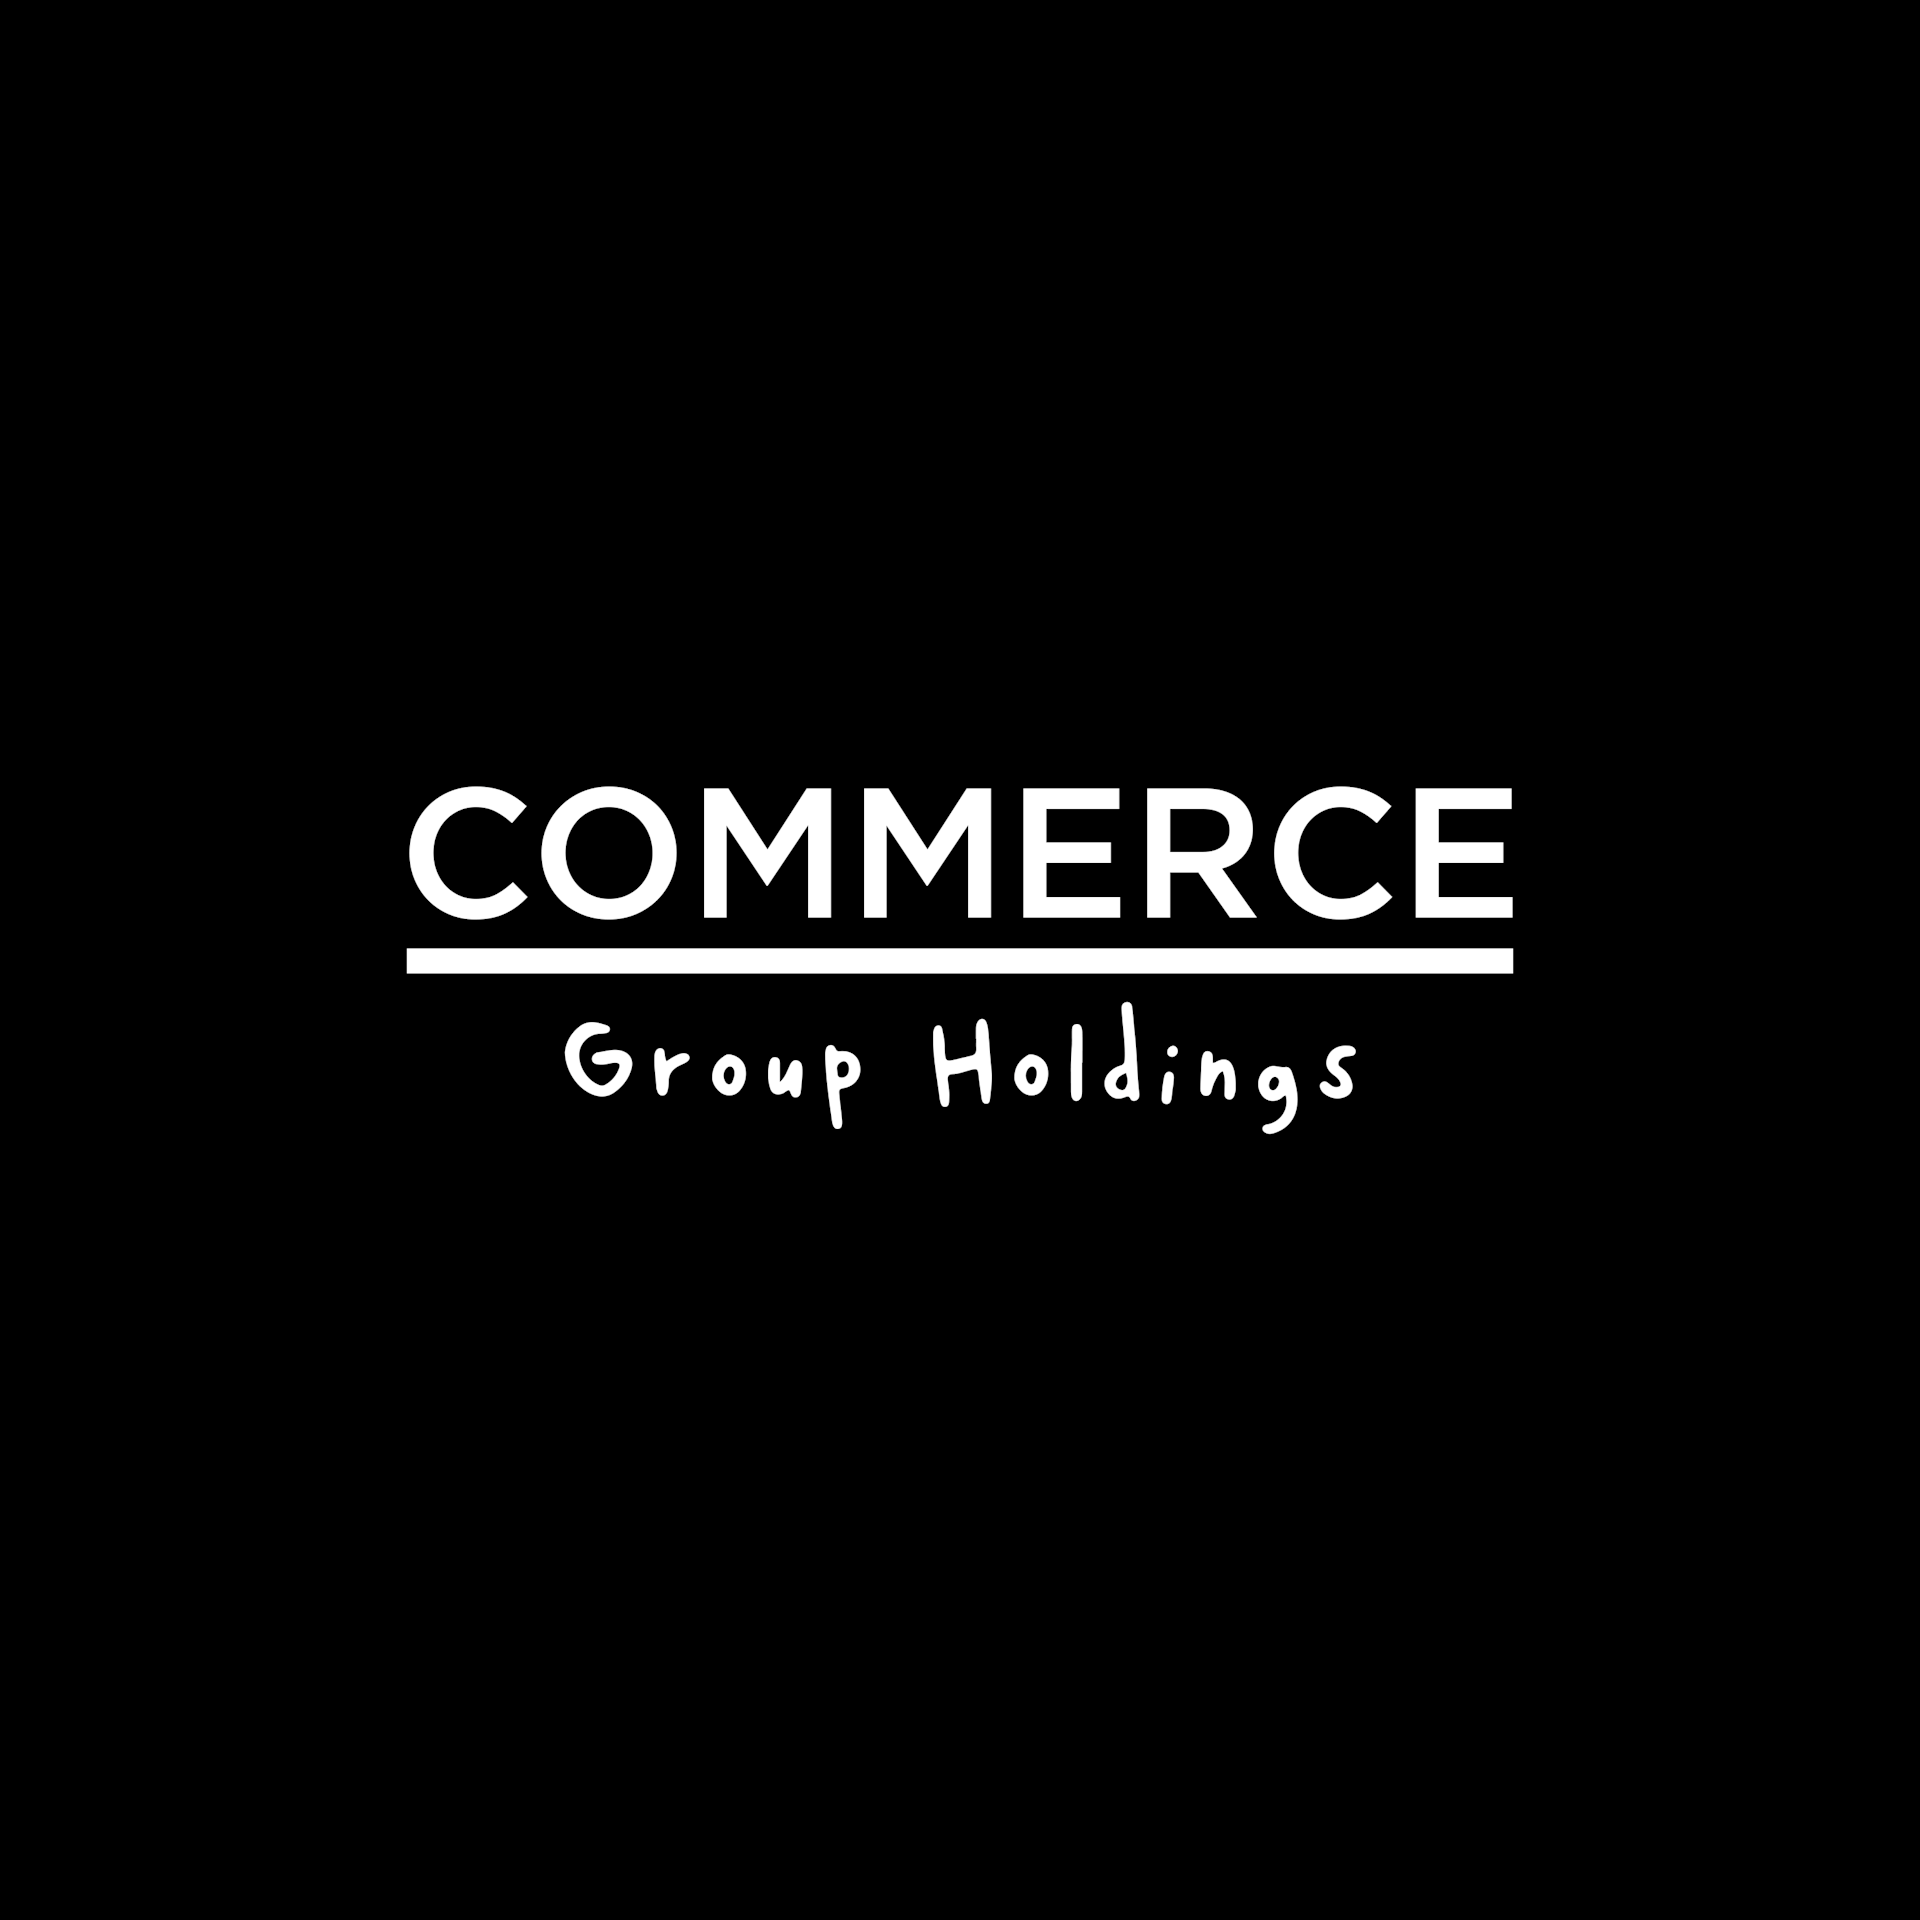 Commerce Group Holdings